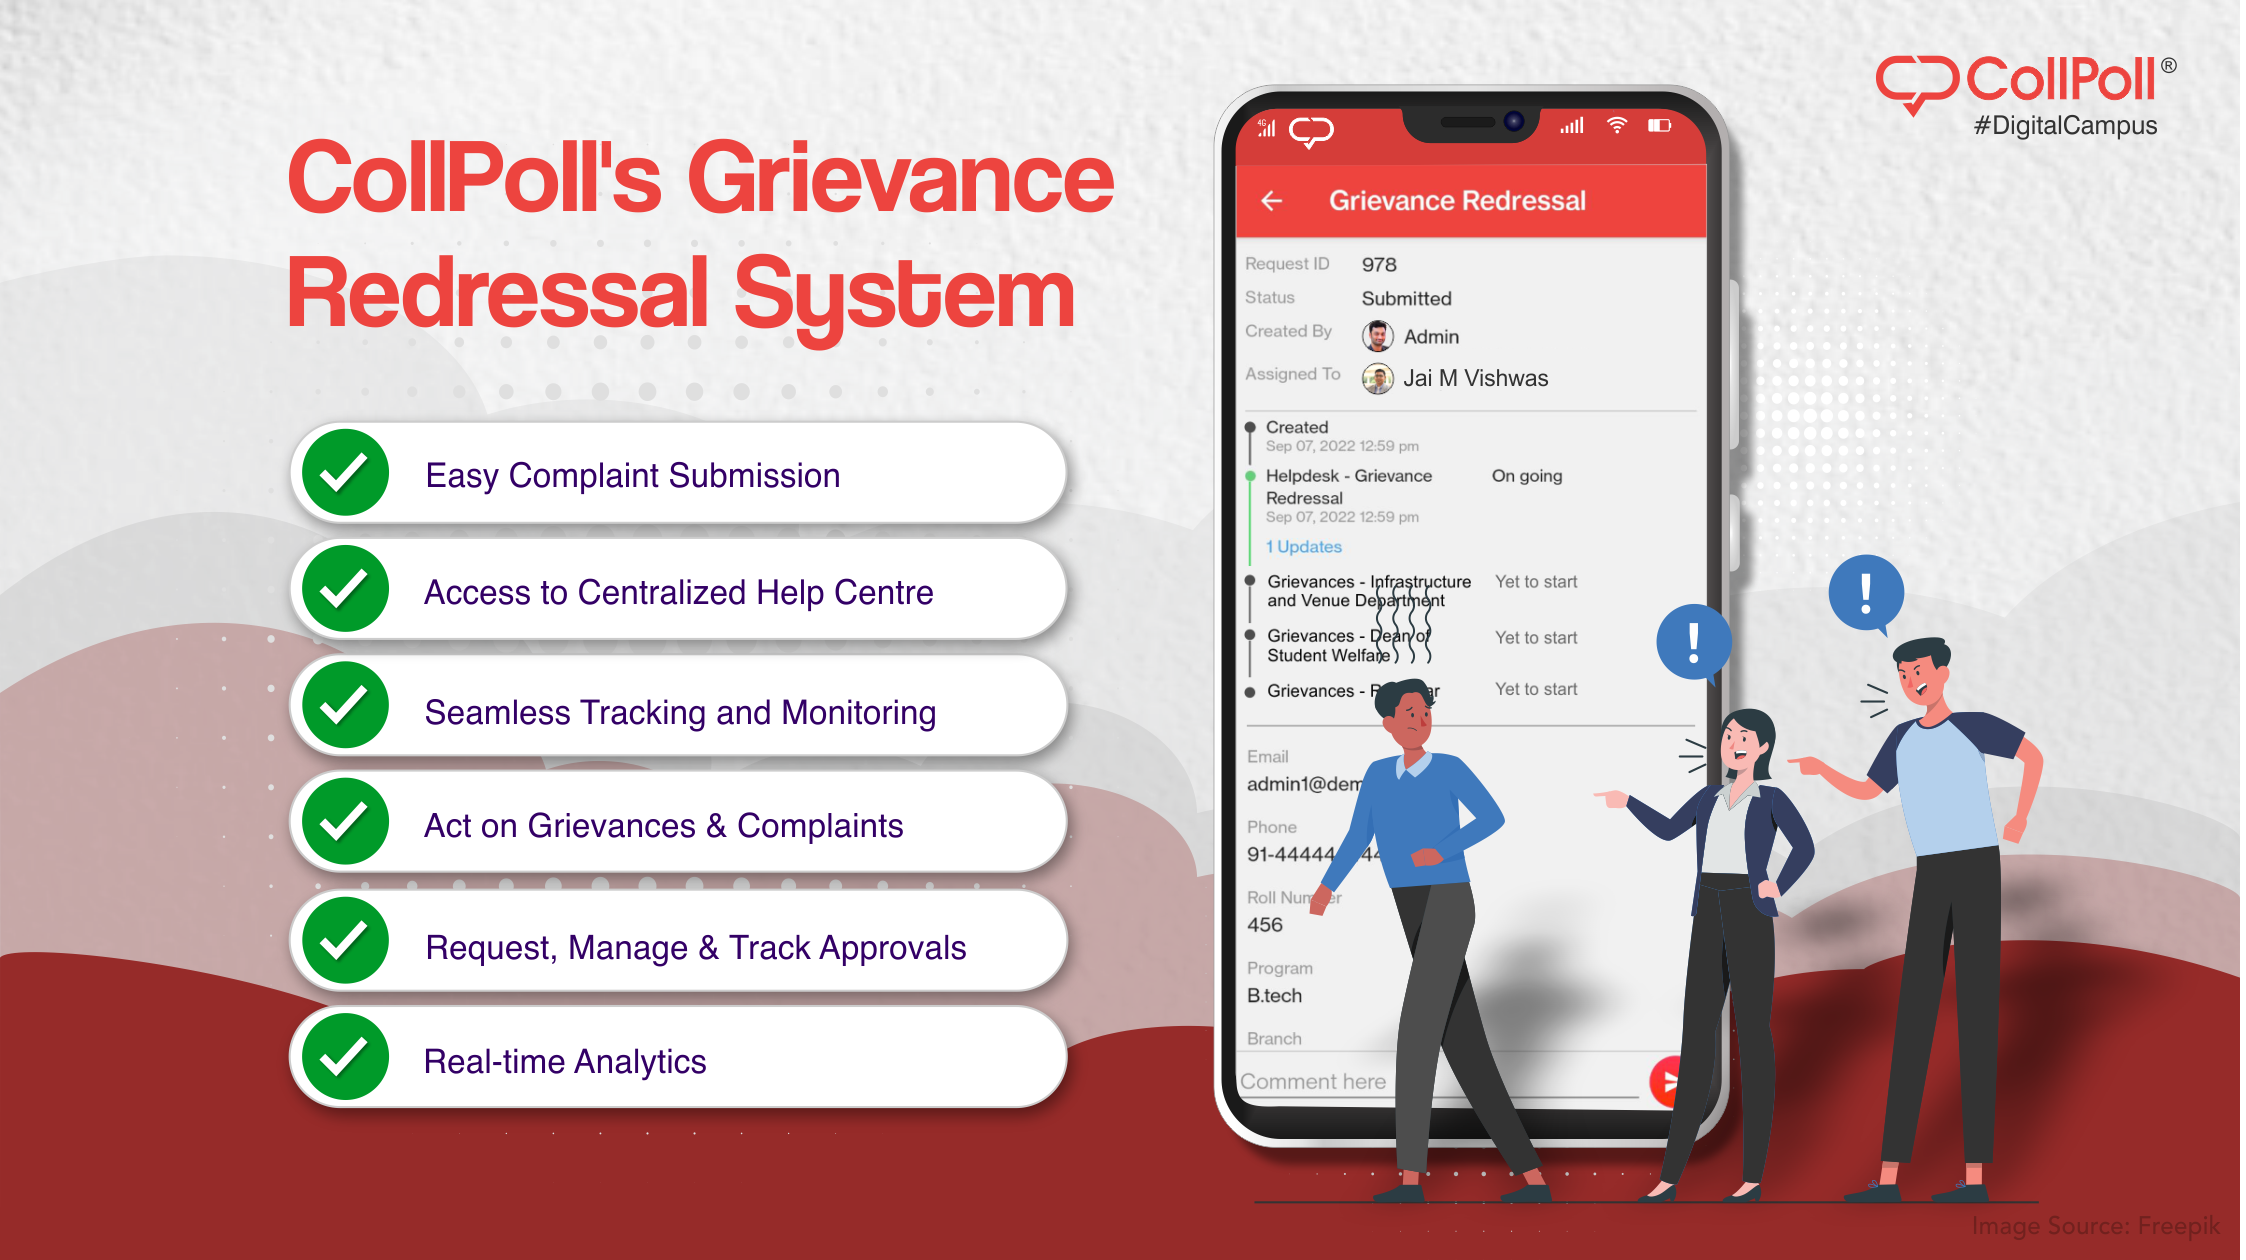 CollPoll's Grievance Redressal System - Features